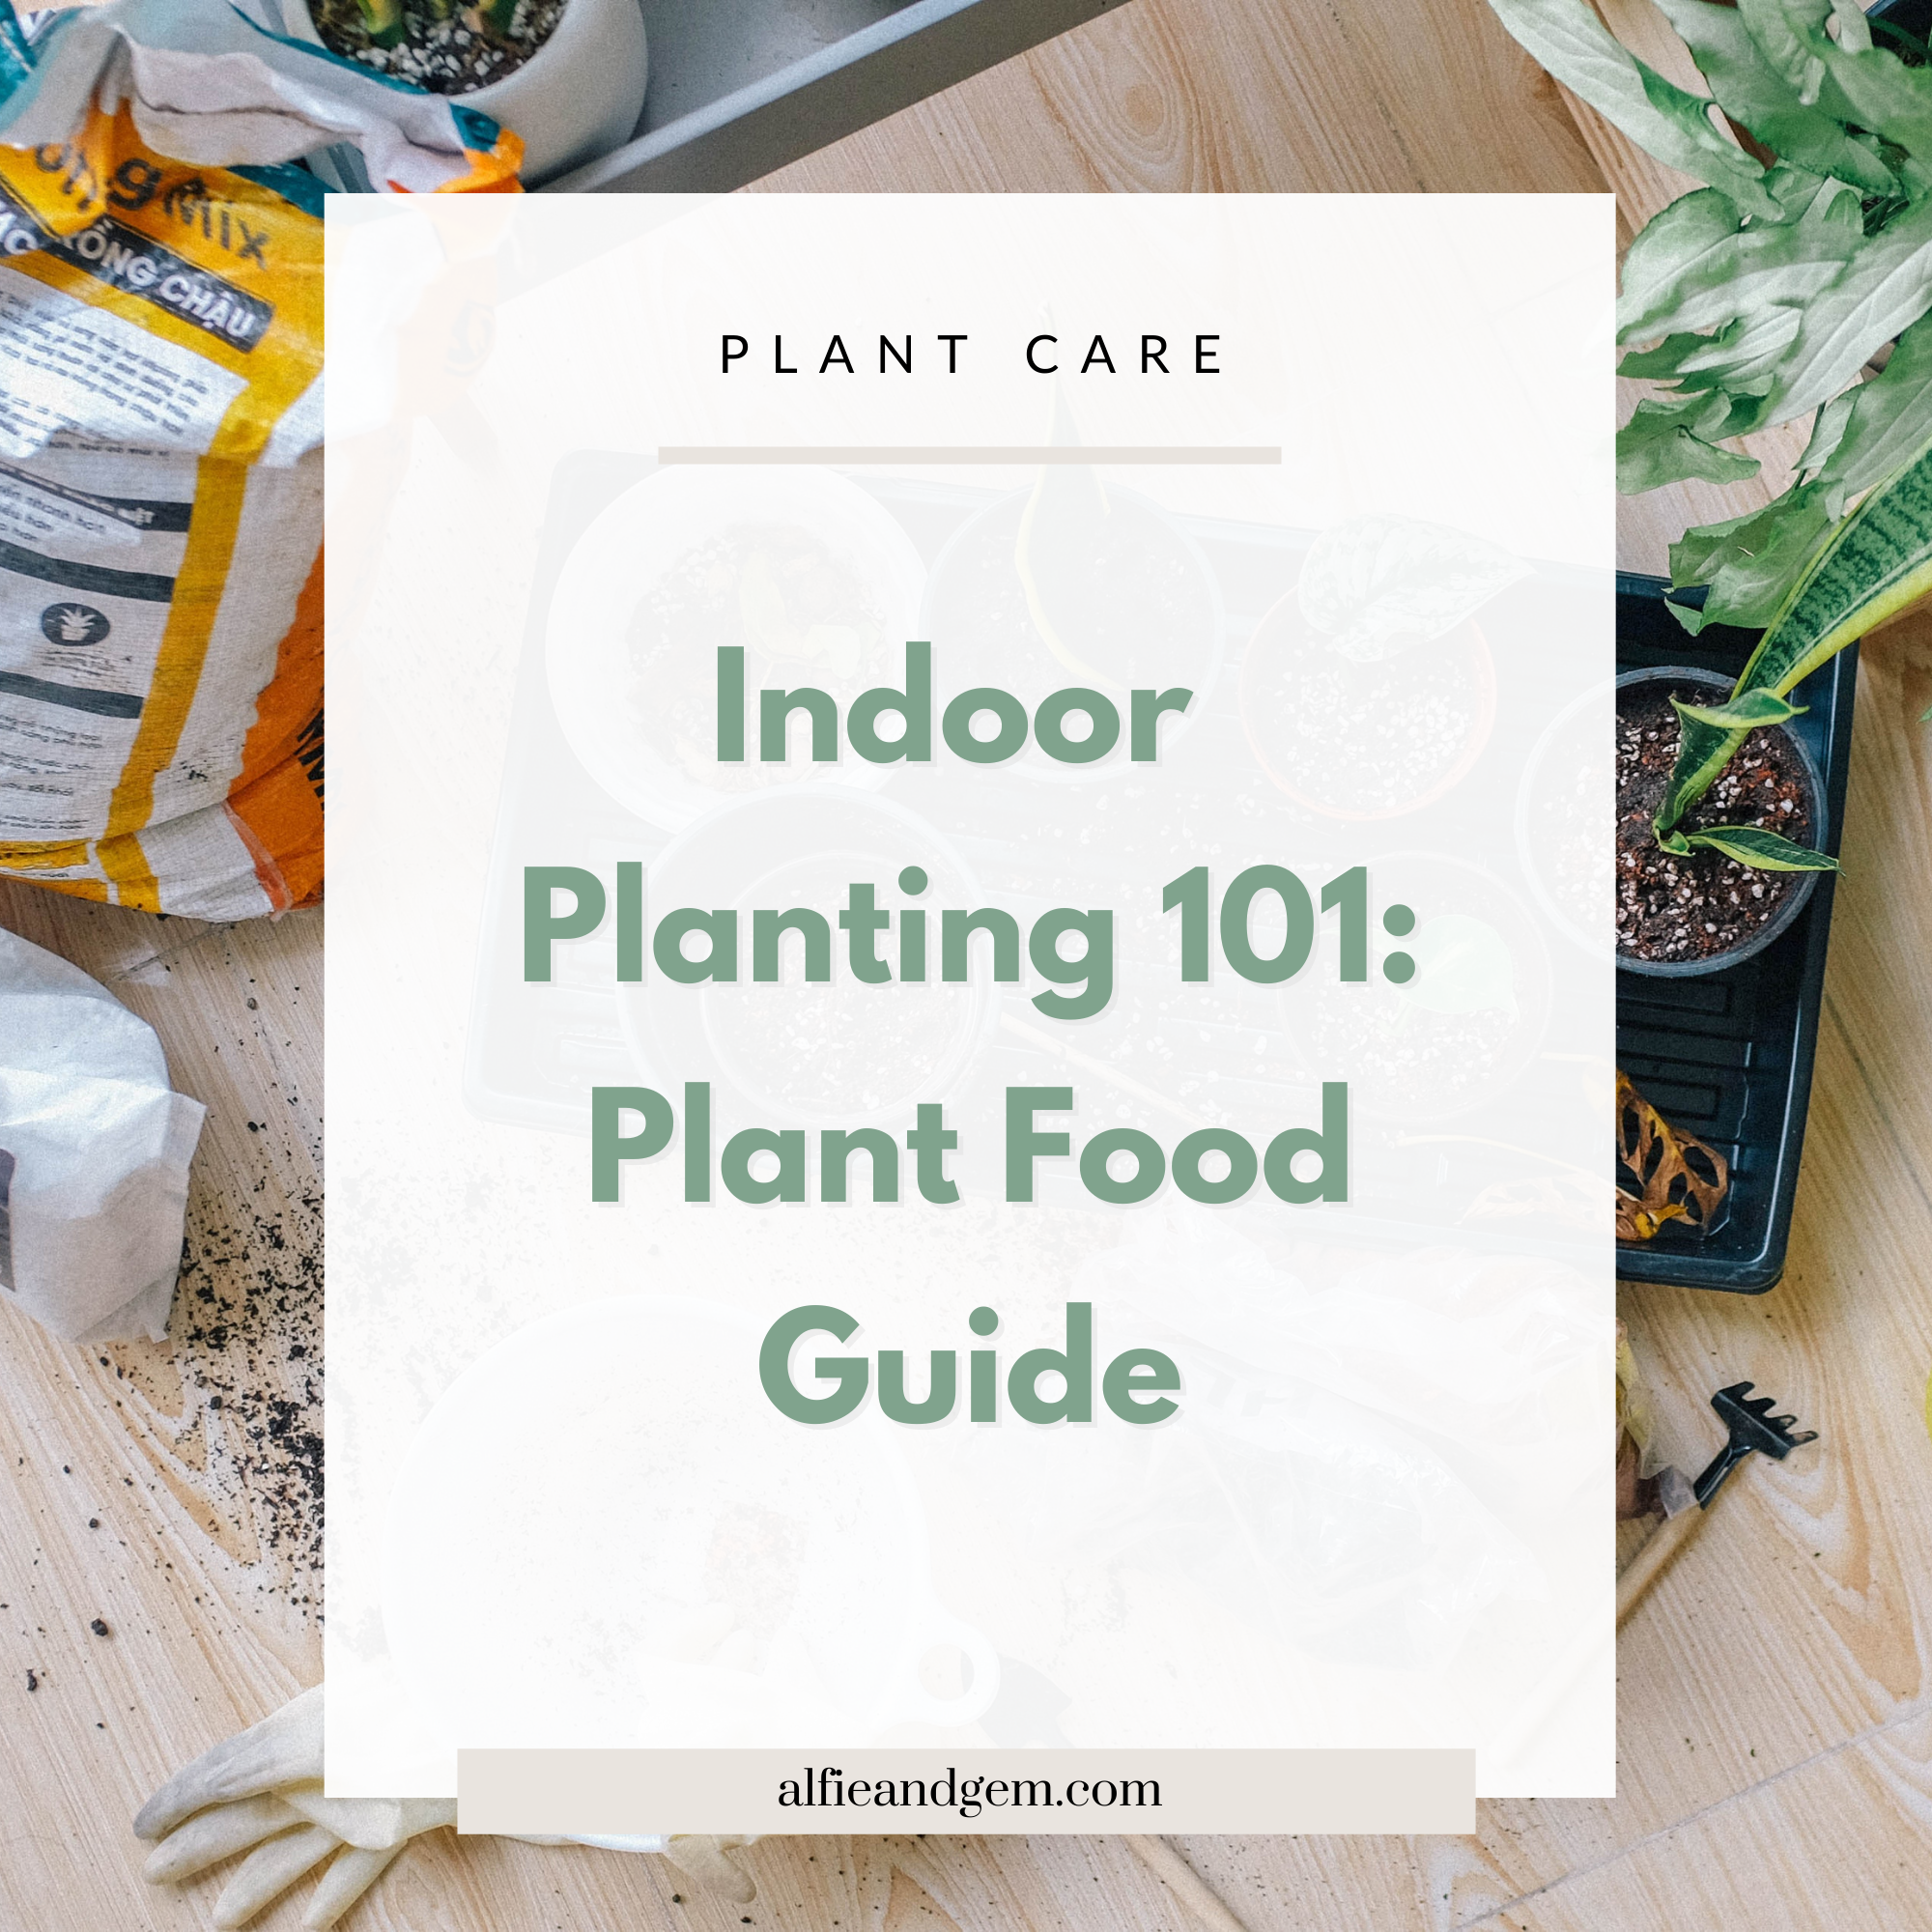 Indoor Planting Guide: Keeping Plants Healthy With Plant Food